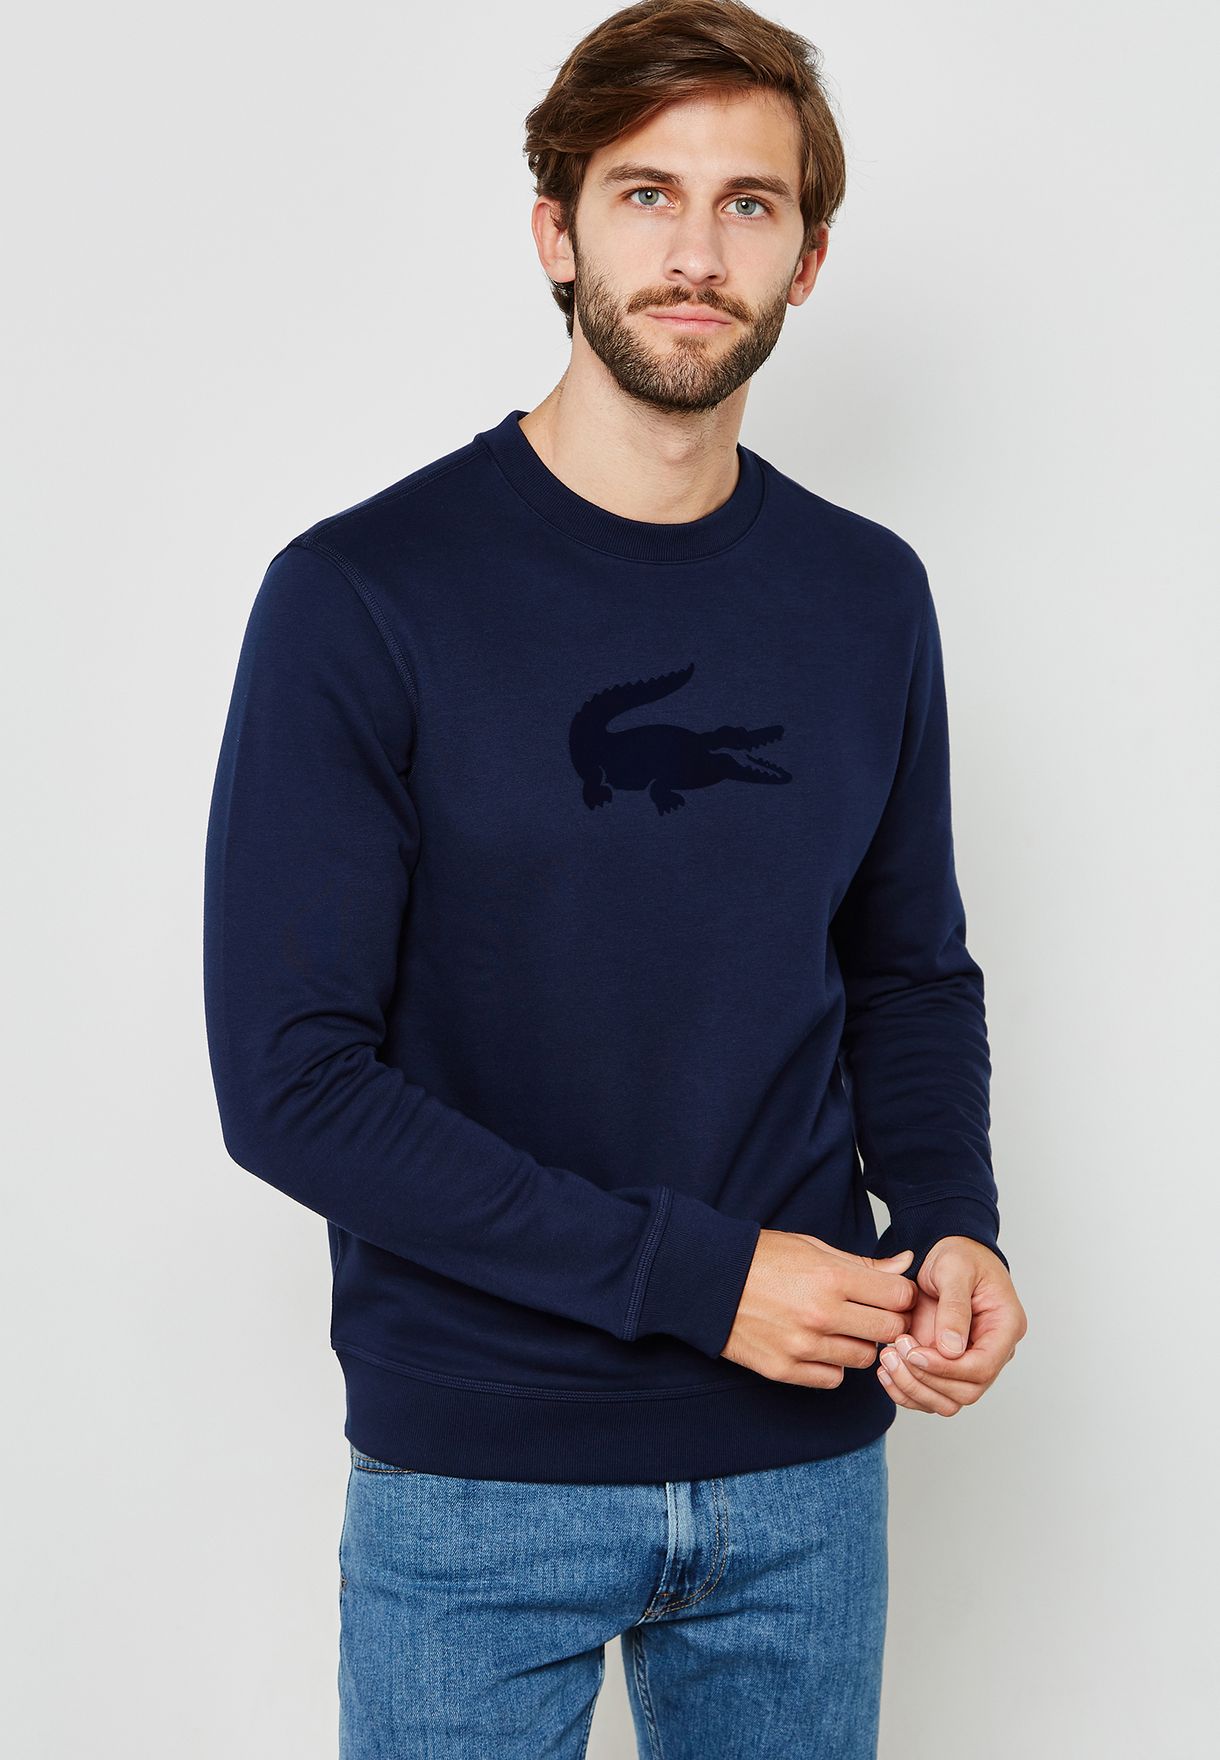 lacoste sh9258 off 67% - online-sms.in